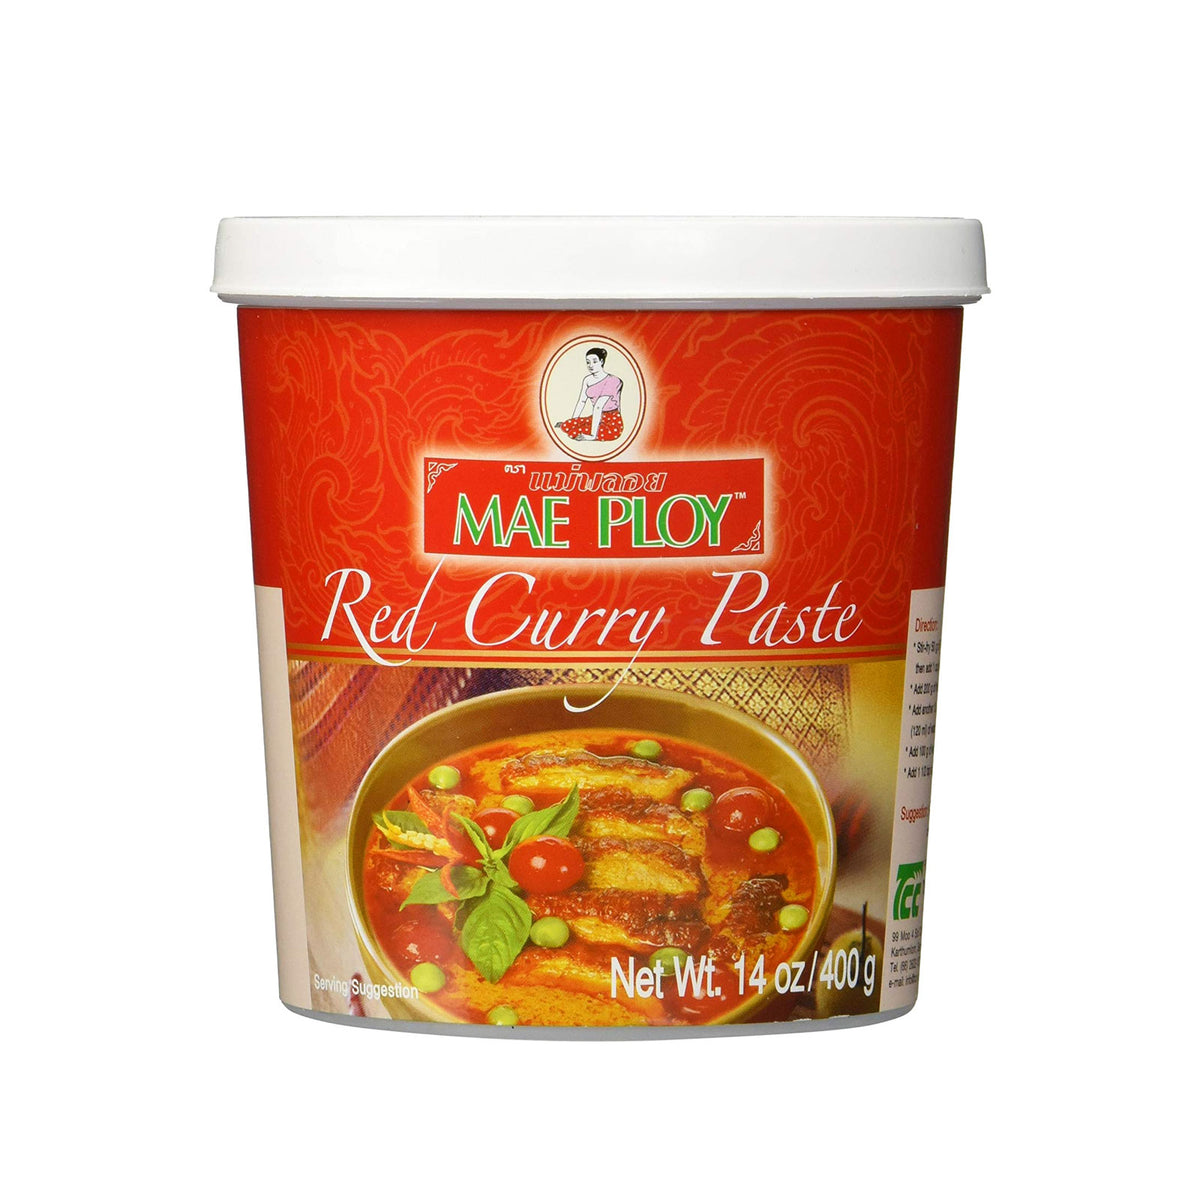 mae ploy red curry paste - 14oz